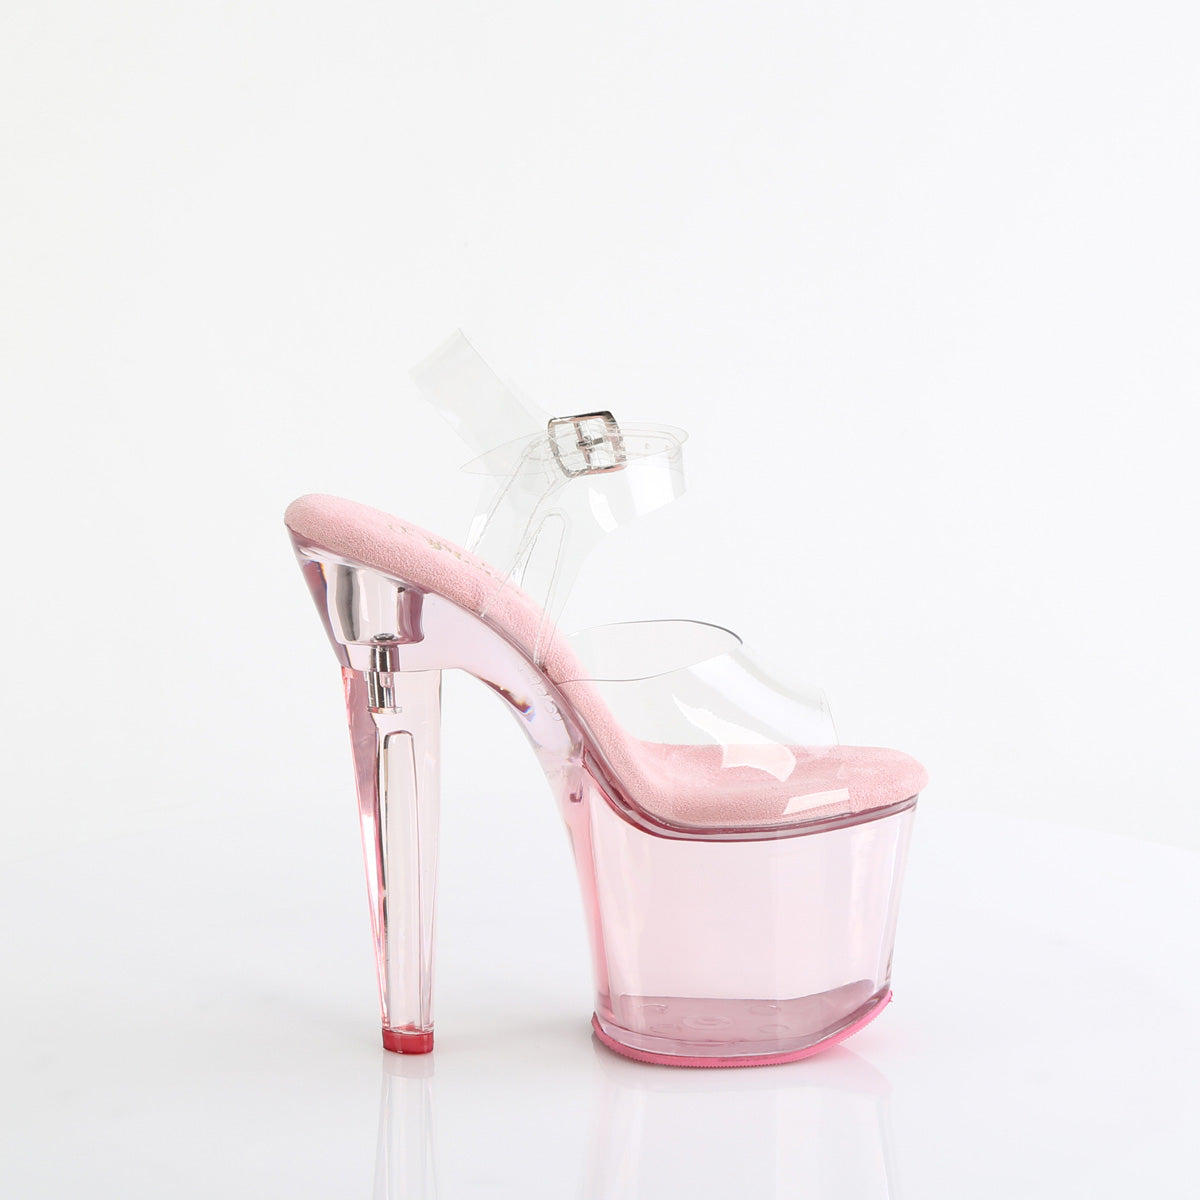 LOVESICK-708T Pleaser Clear/B Pink Tinted Platform Shoes (Sexy Shoes)